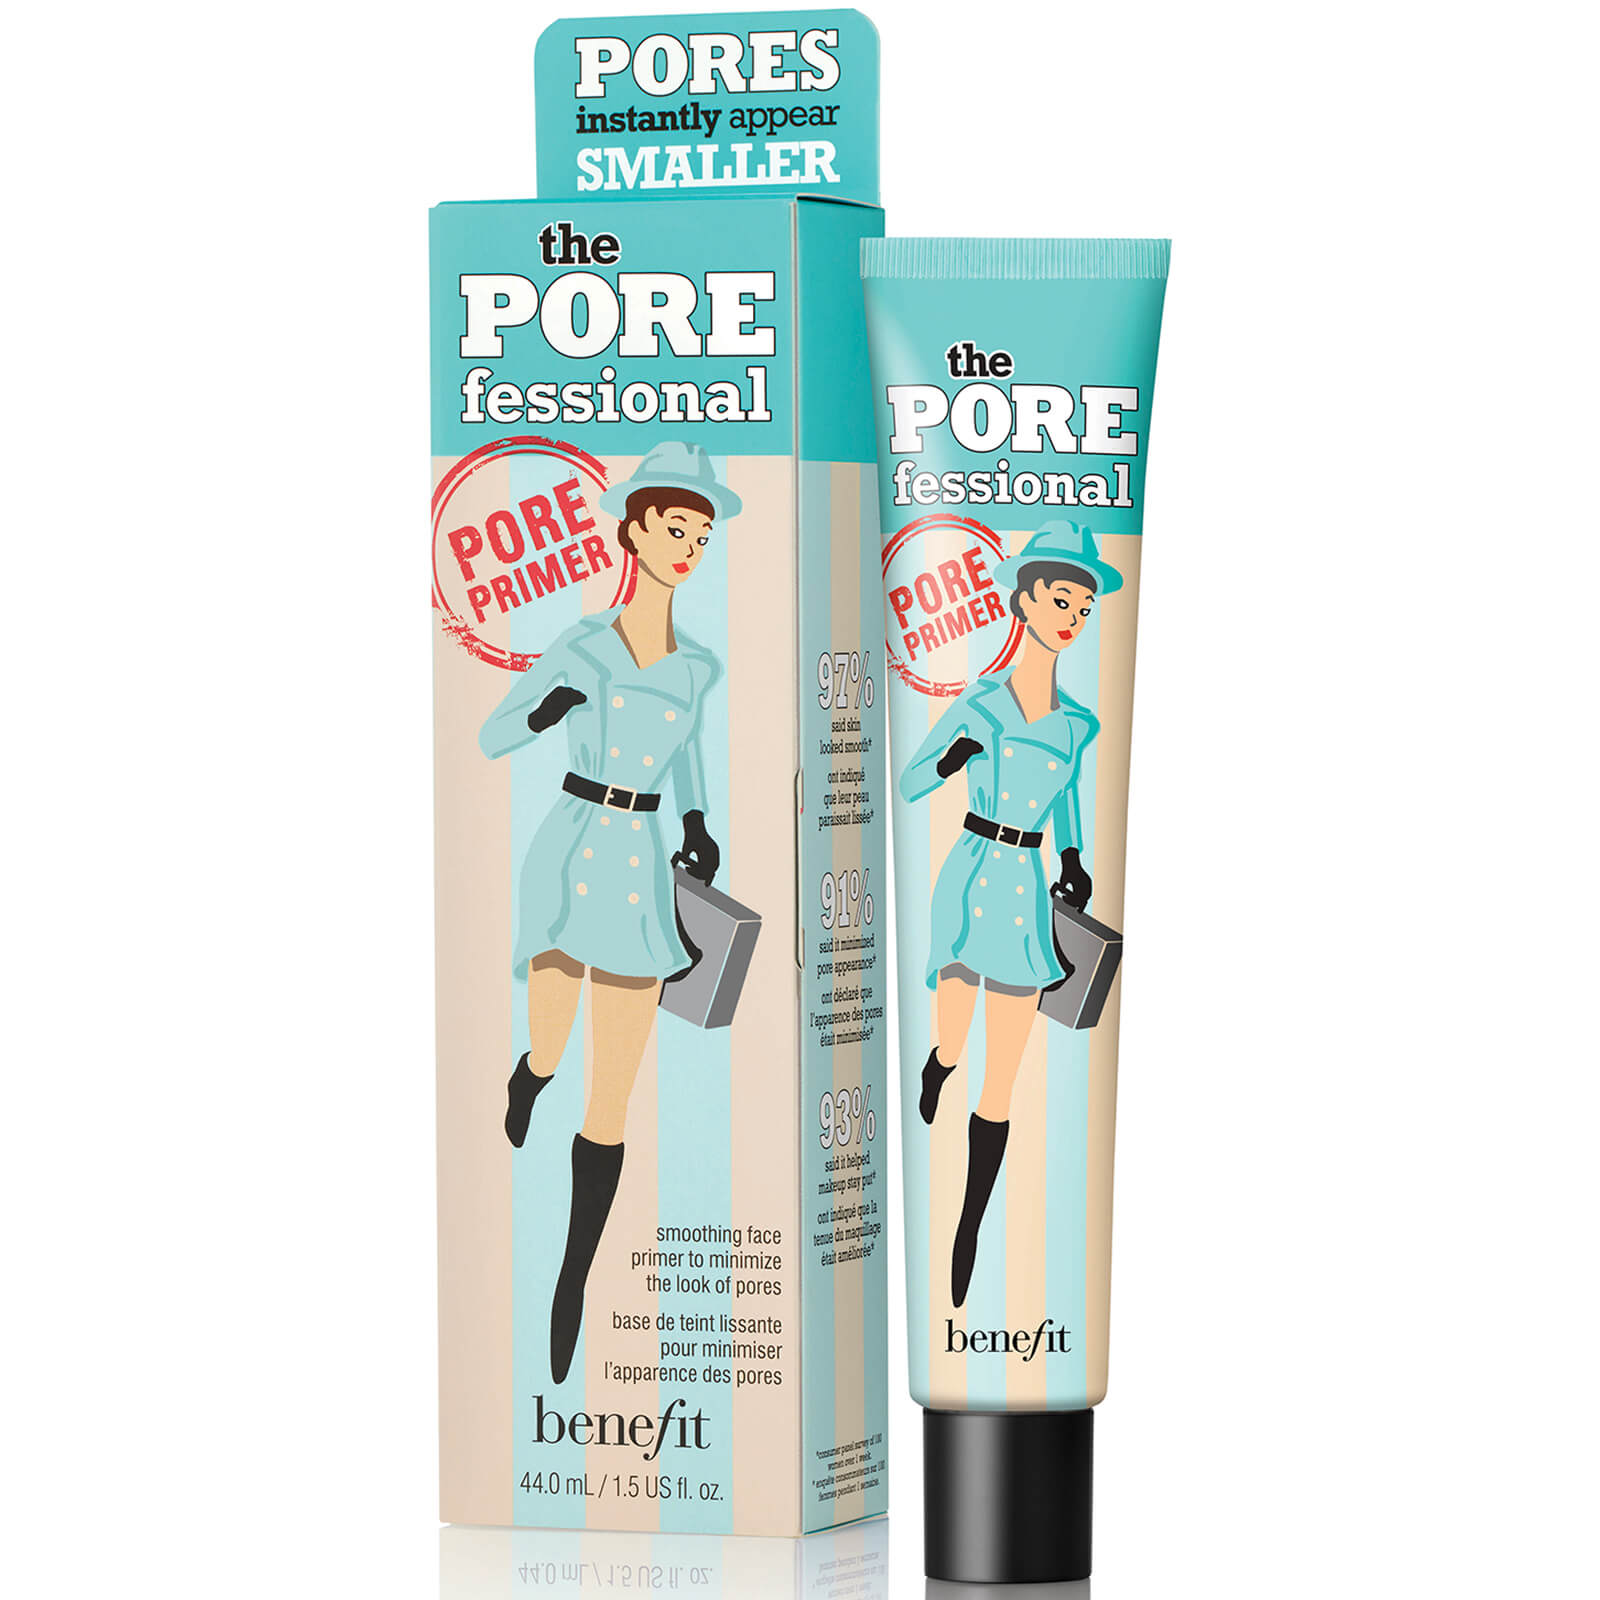 BENEFIT - THE POREFESSIONAL value size - 44ML (EBS)